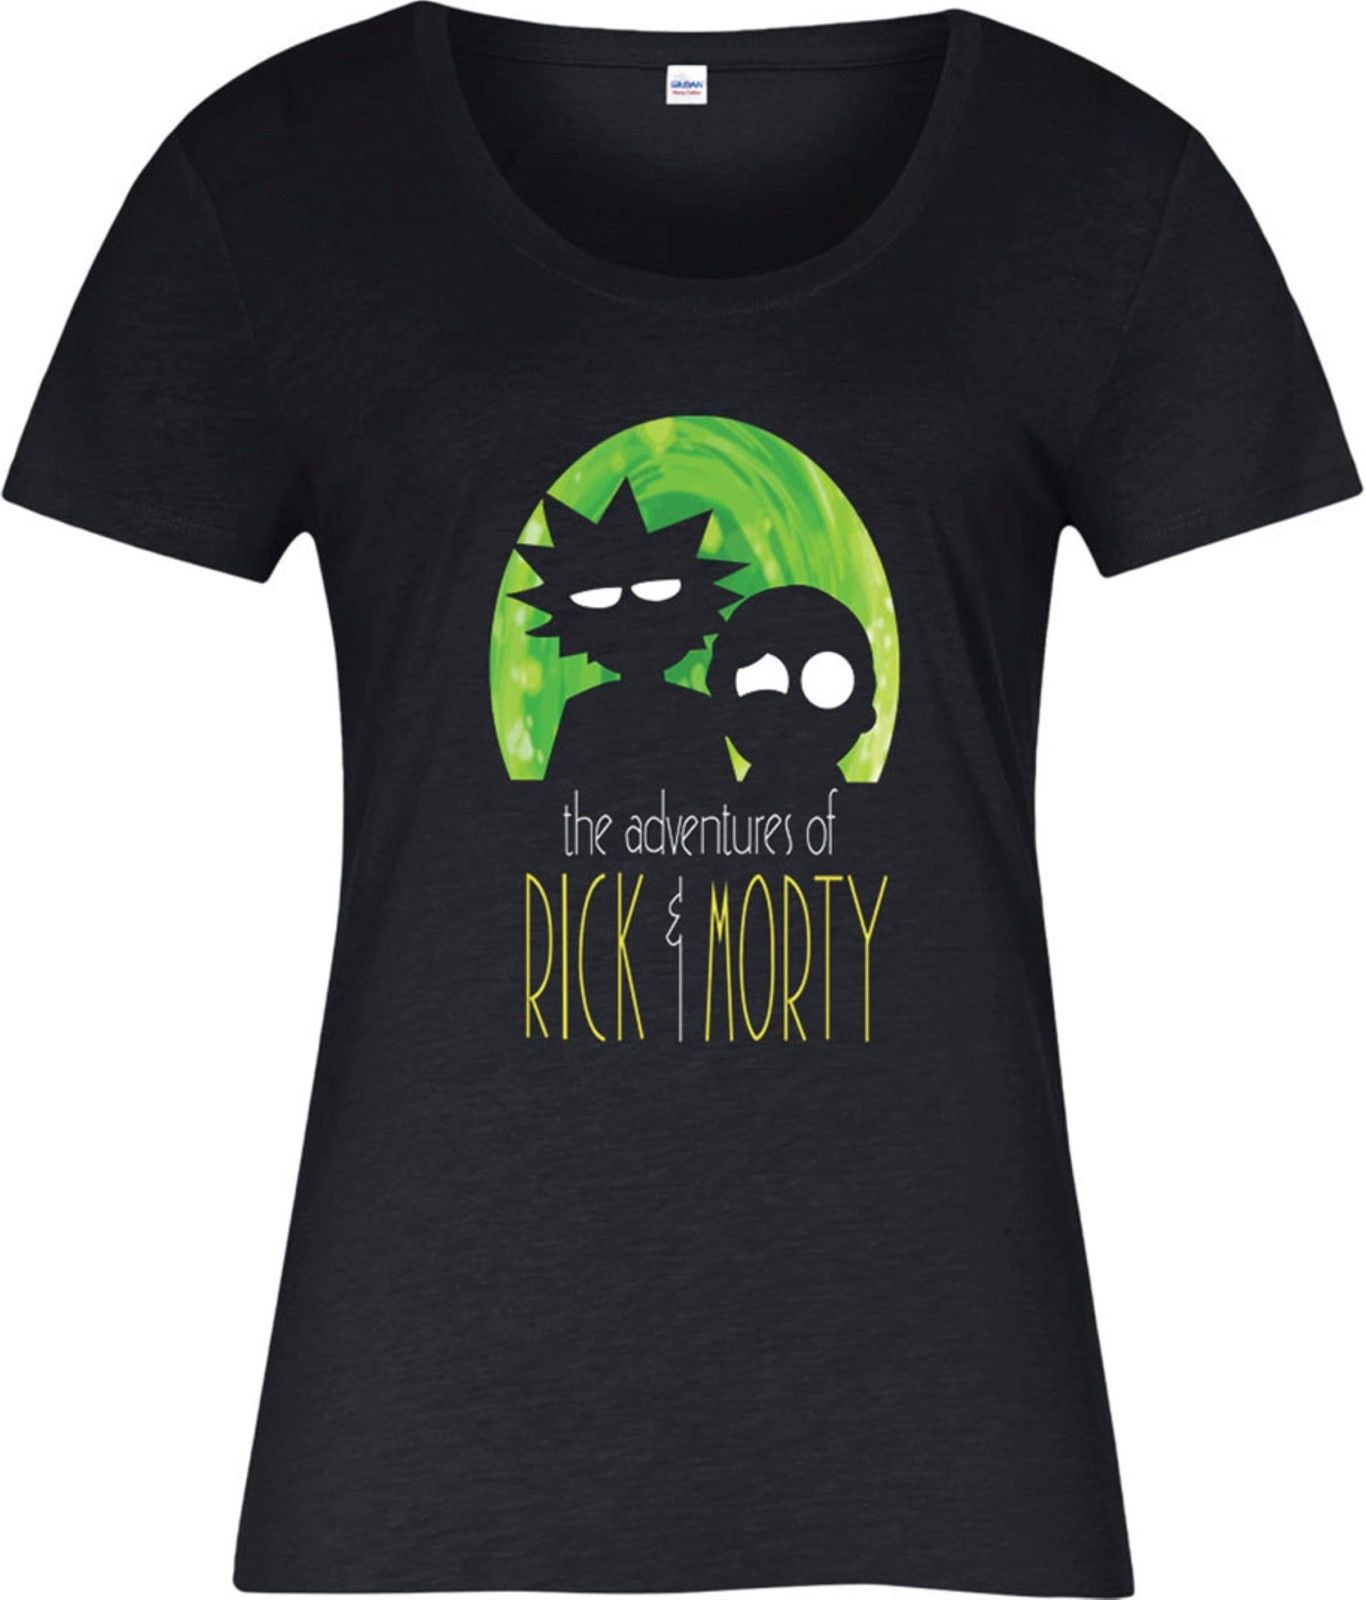 Rick and morty ladies t shirt Saint Augustine Puma pacer next excel sneakers â our collection of 